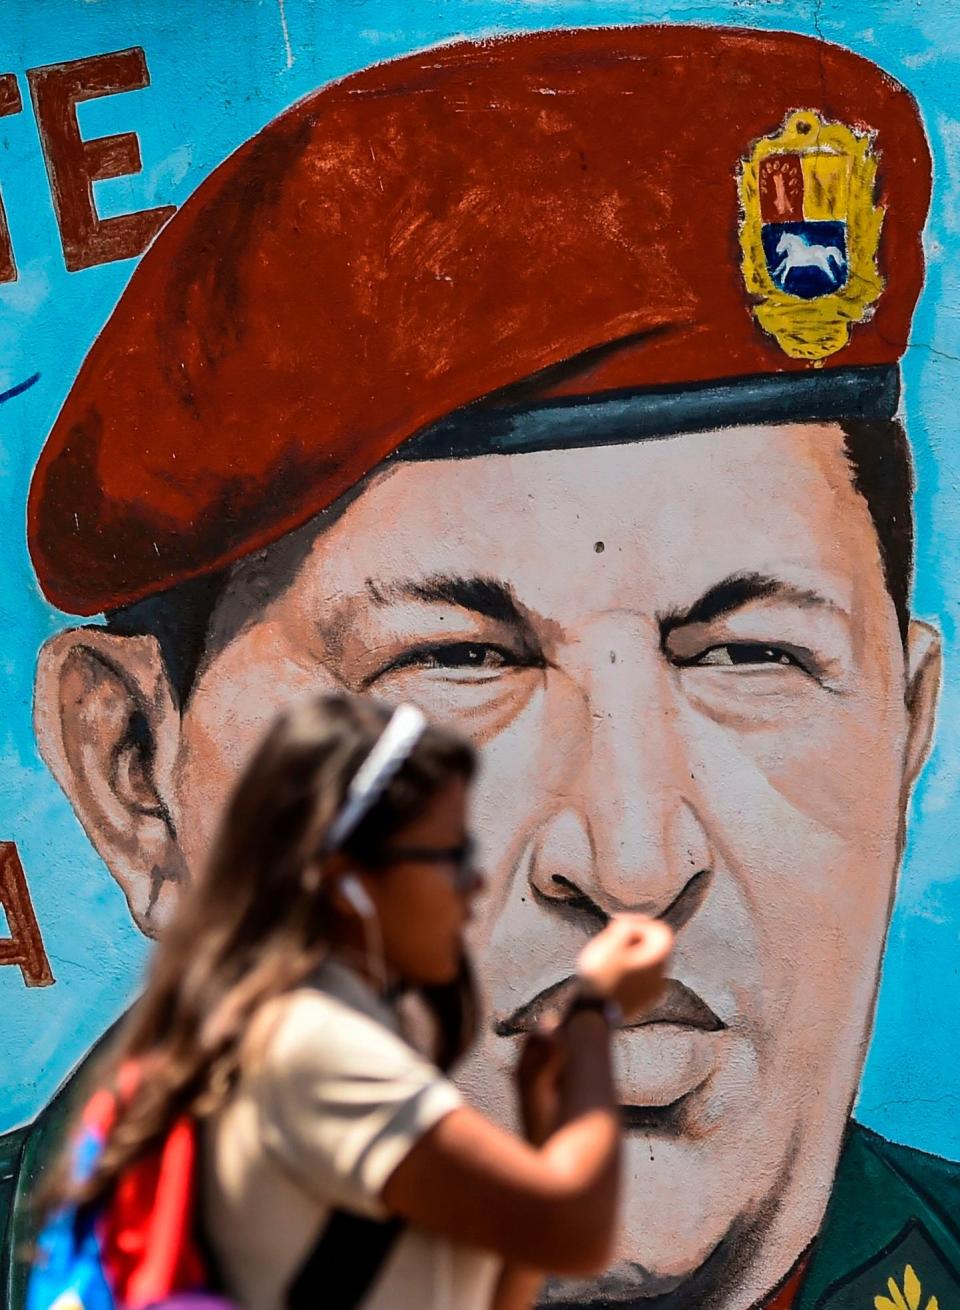 A student walks past a painting of late Venezuelan President Hugo Chavez on a wall in Caracas on January 29, 2019. - Venezuelan President Nicolas Maduro moved Tuesday to try to check the growing clout of opposition rival Juan Guaido as the United States tightened its stranglehold on the leftist regime's main source of revenues.